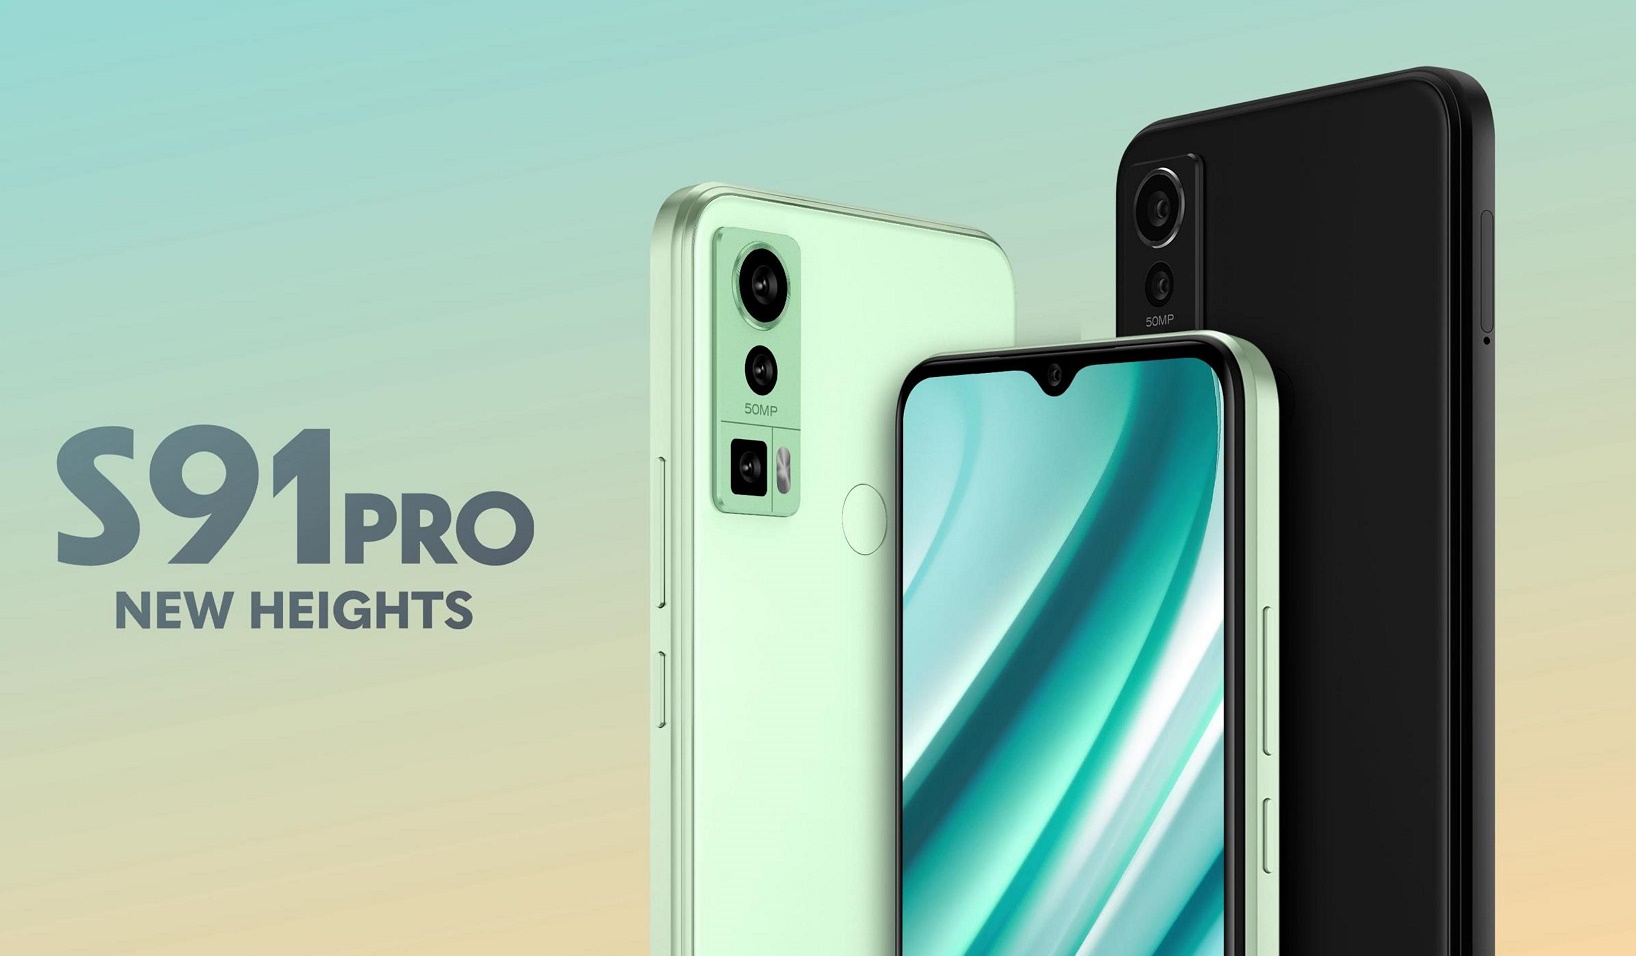 BLU S91 Pro with Helio G37 CPU announced BLU S91 Pro color optionss